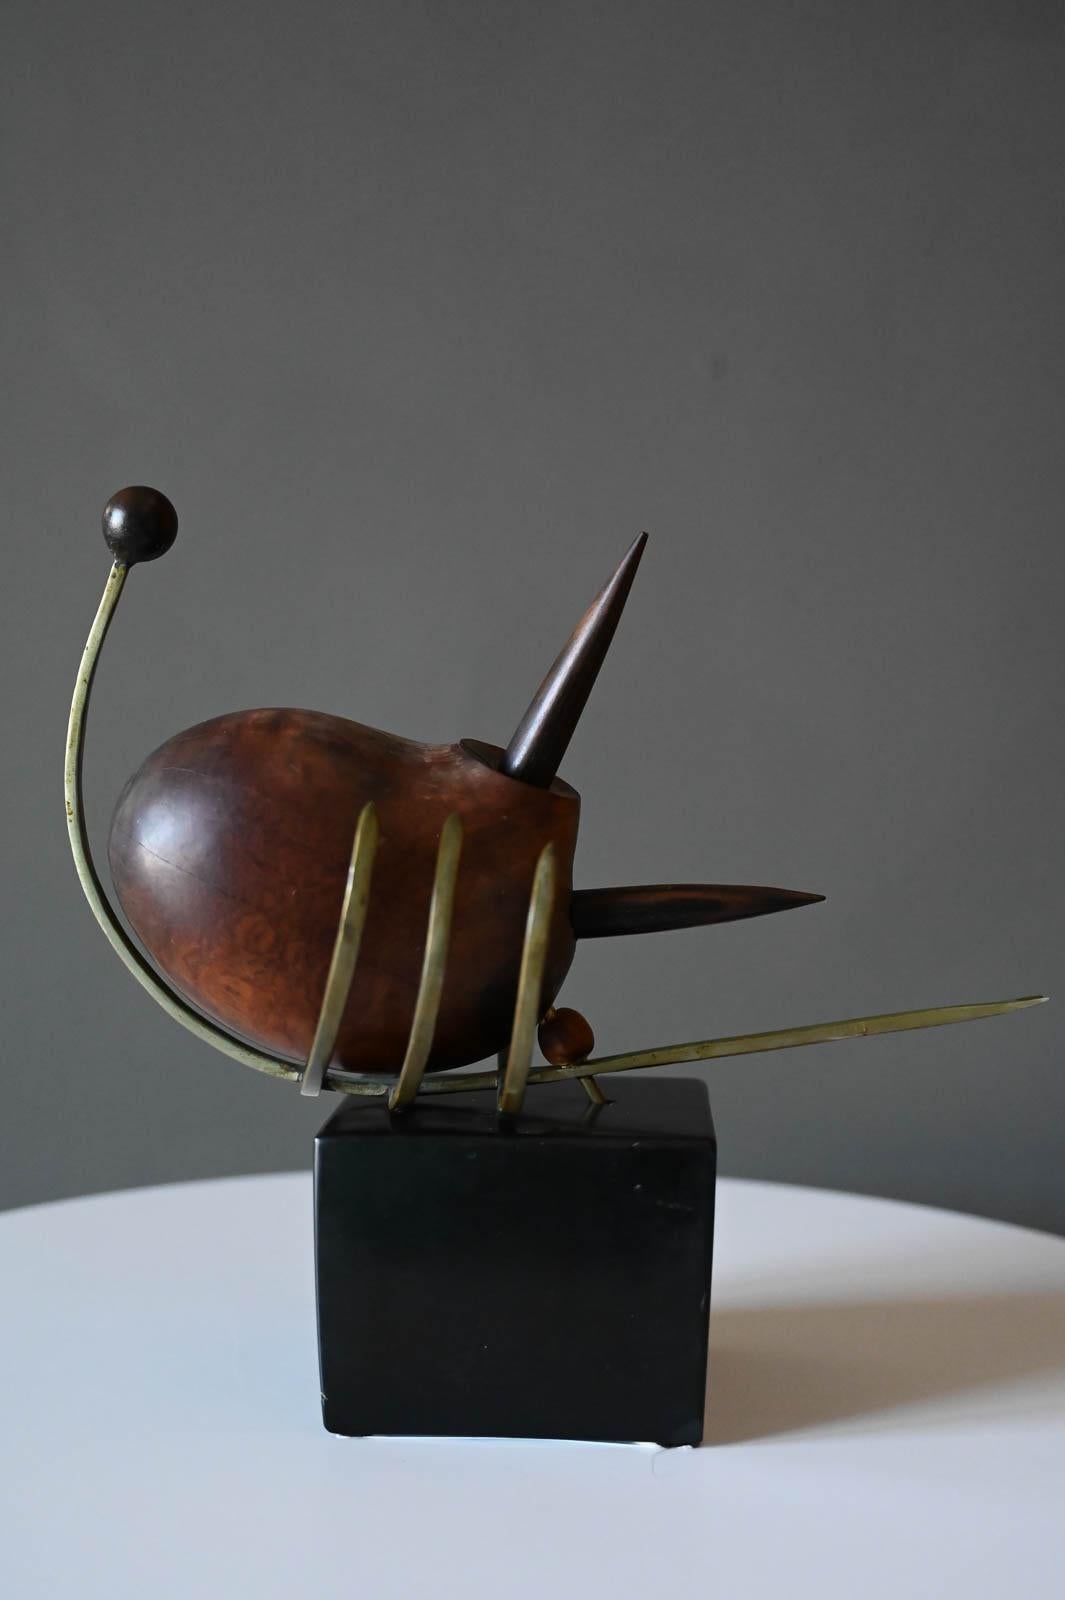 Abstract wood and brass Scorpion sculpture, circa 1965. Abstract brutalist style scorpion on black base. Beautiful carved wood with solid brass spikes and legs. Some cracking of wood as shown, still lots of character for this really unique piece.